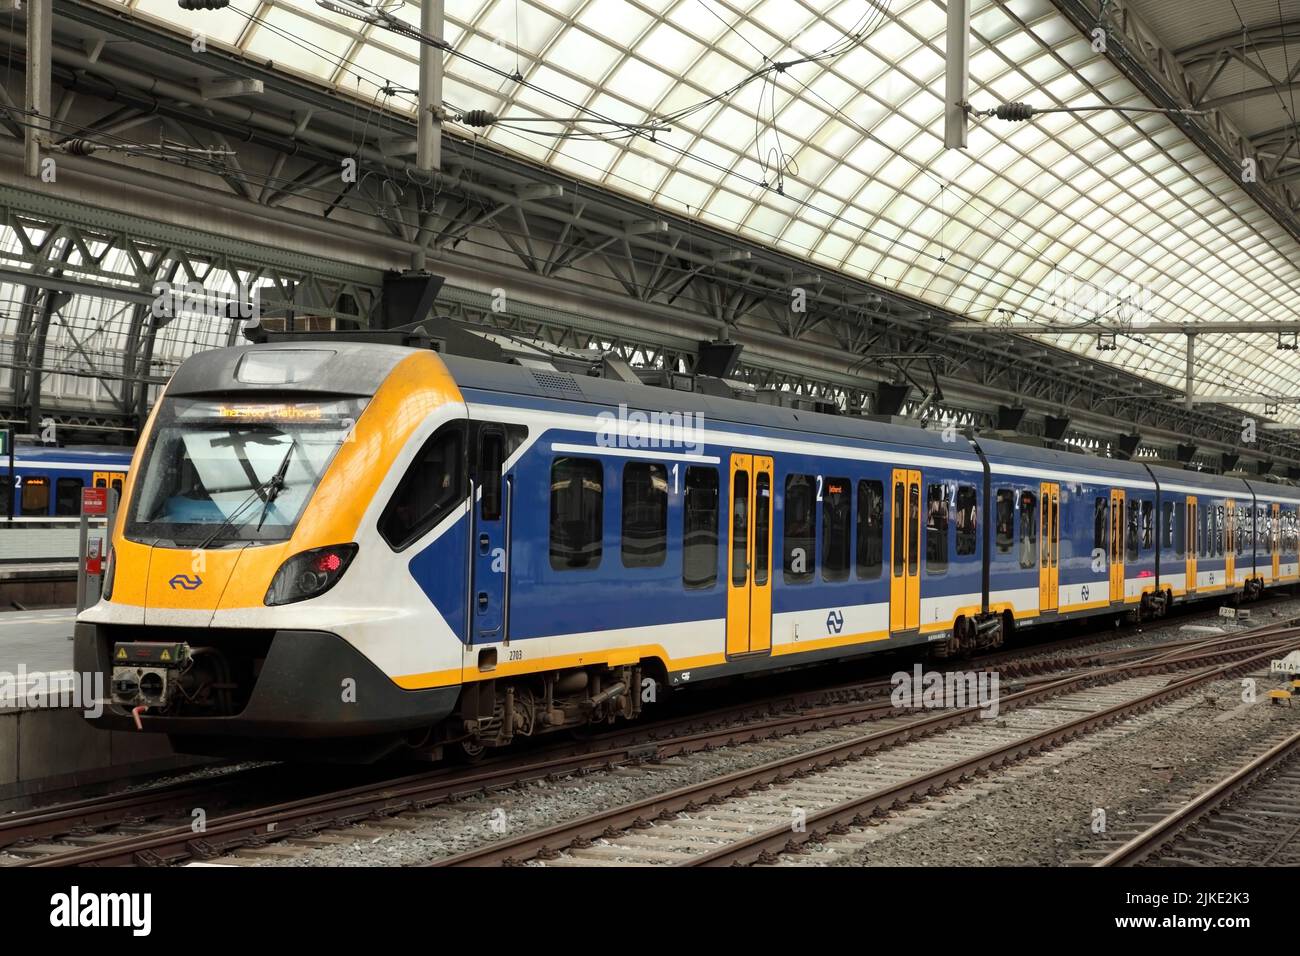 CAF-constructed Sprinter New Generation or SNG Civity train at Amsterdam Centraal railway station, Netherlands. Stock Photo